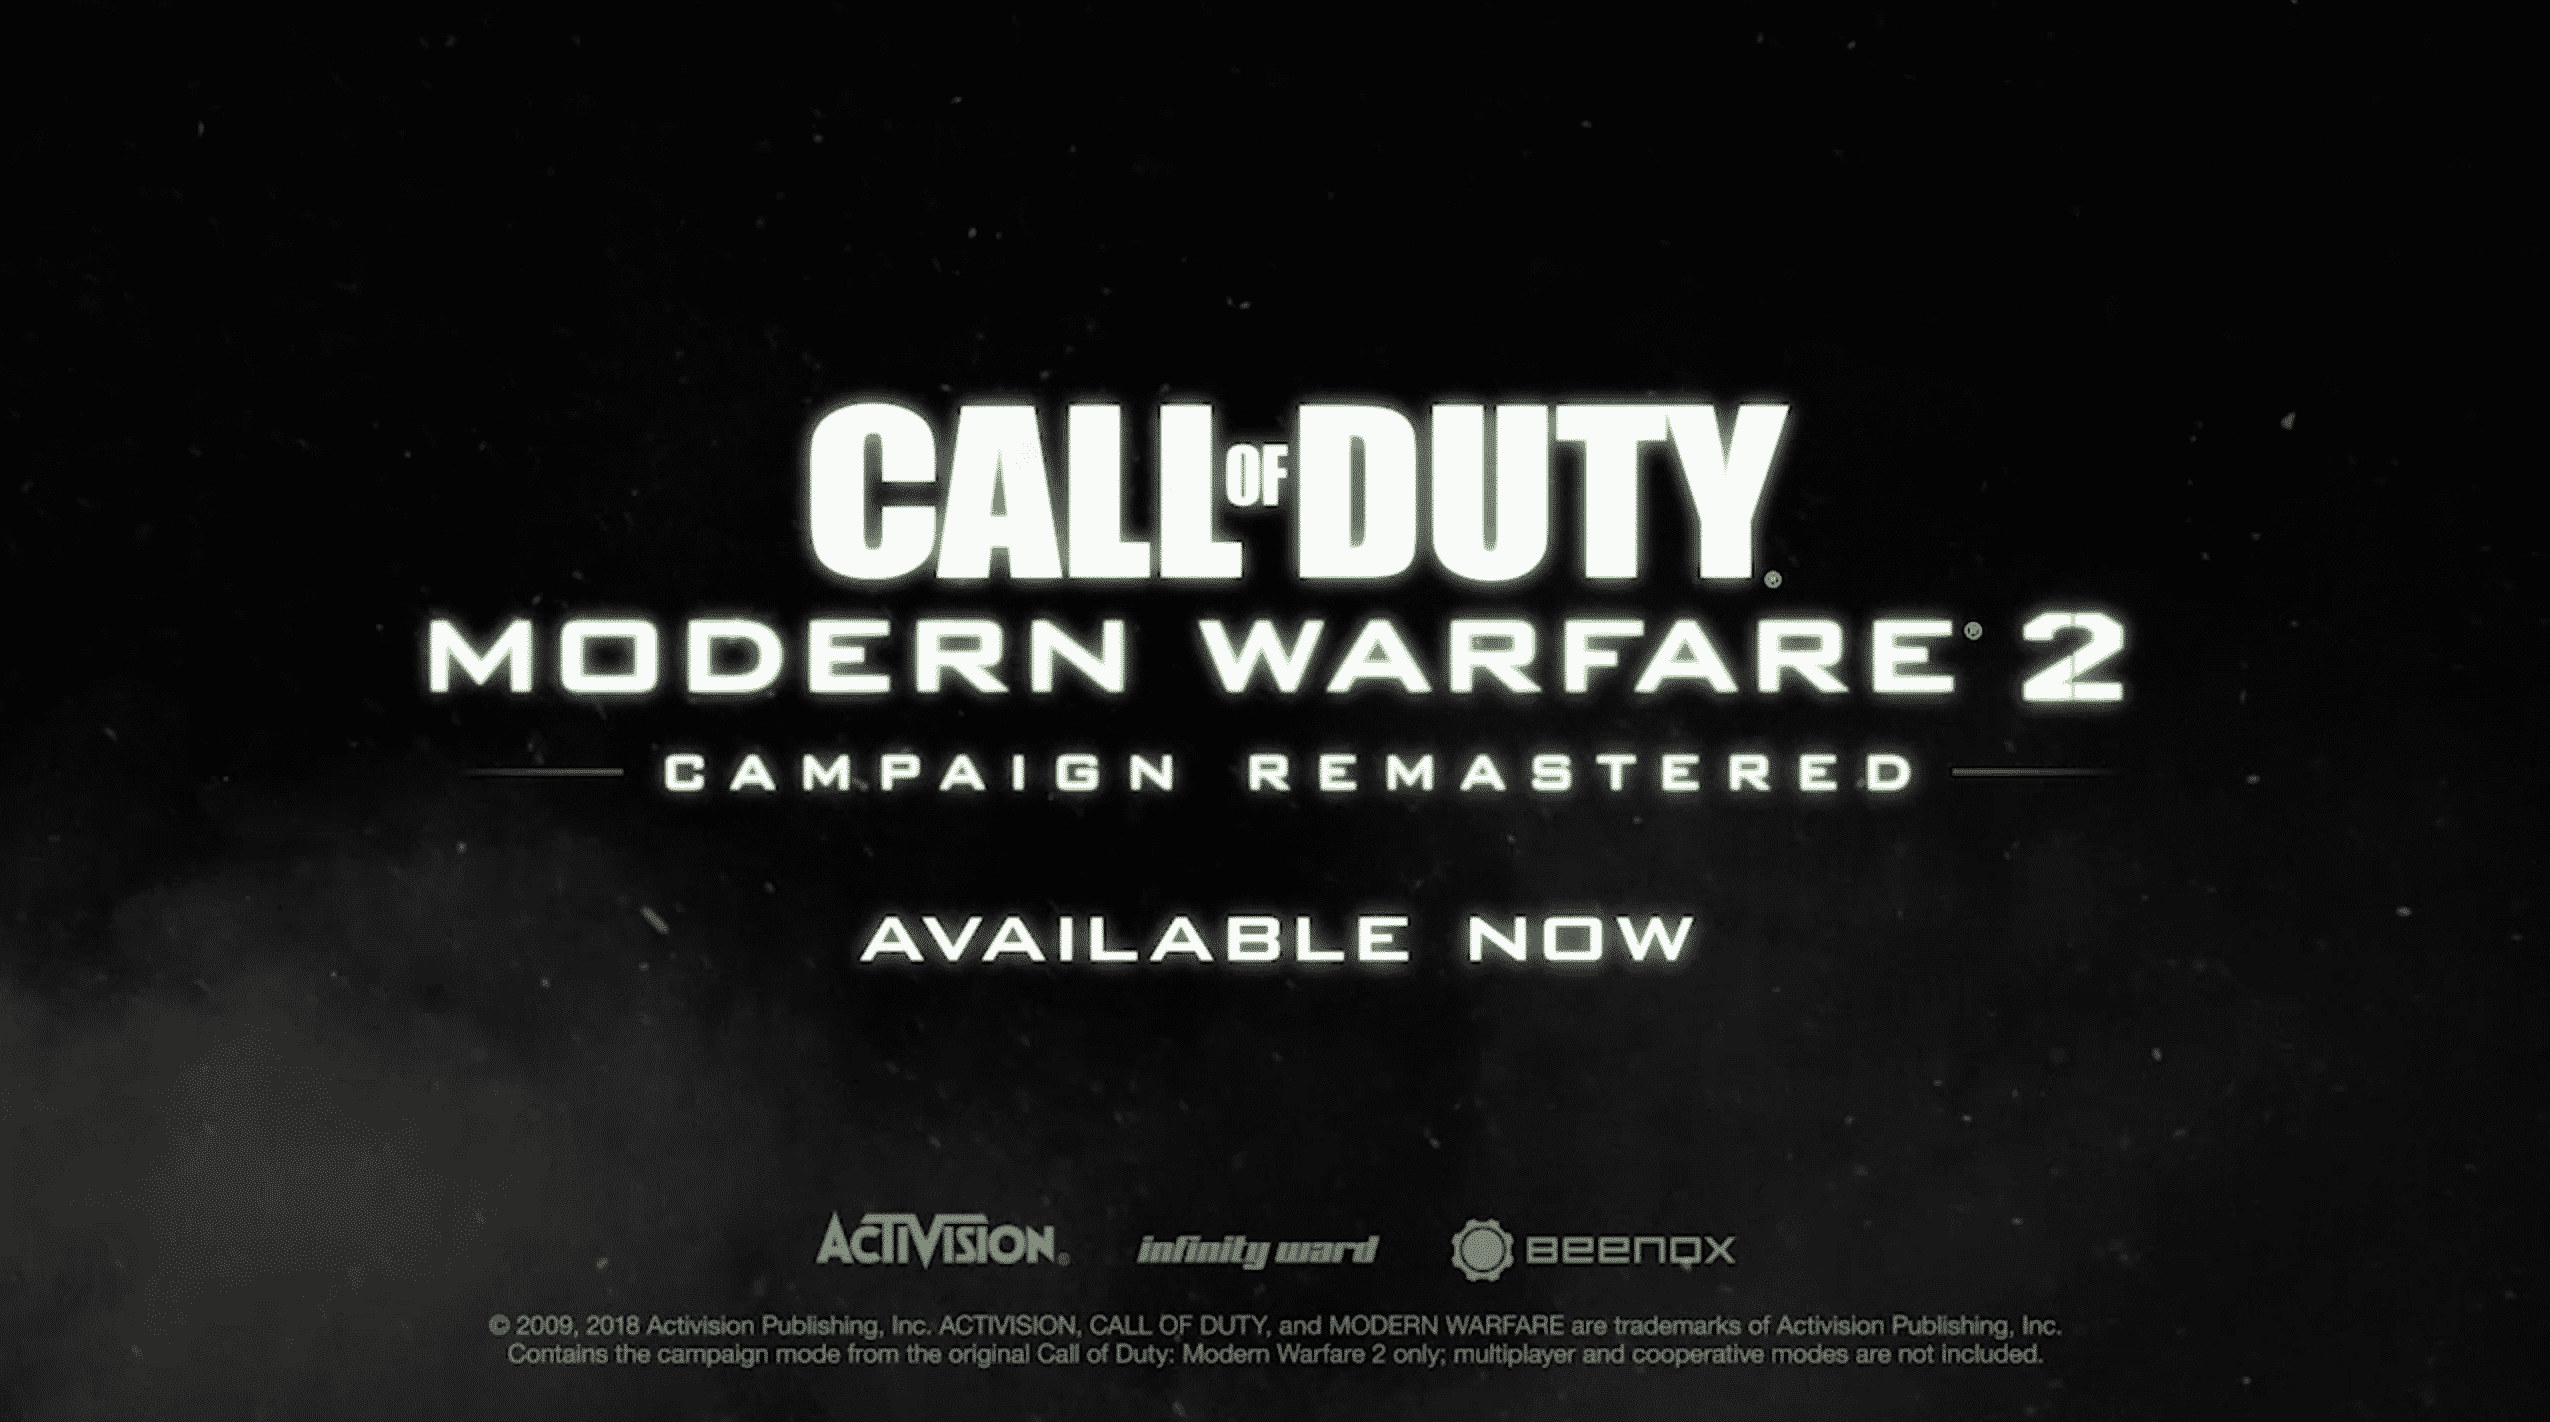 Remastered 'Call of Duty: Modern Warfare 2' is available now on PS4